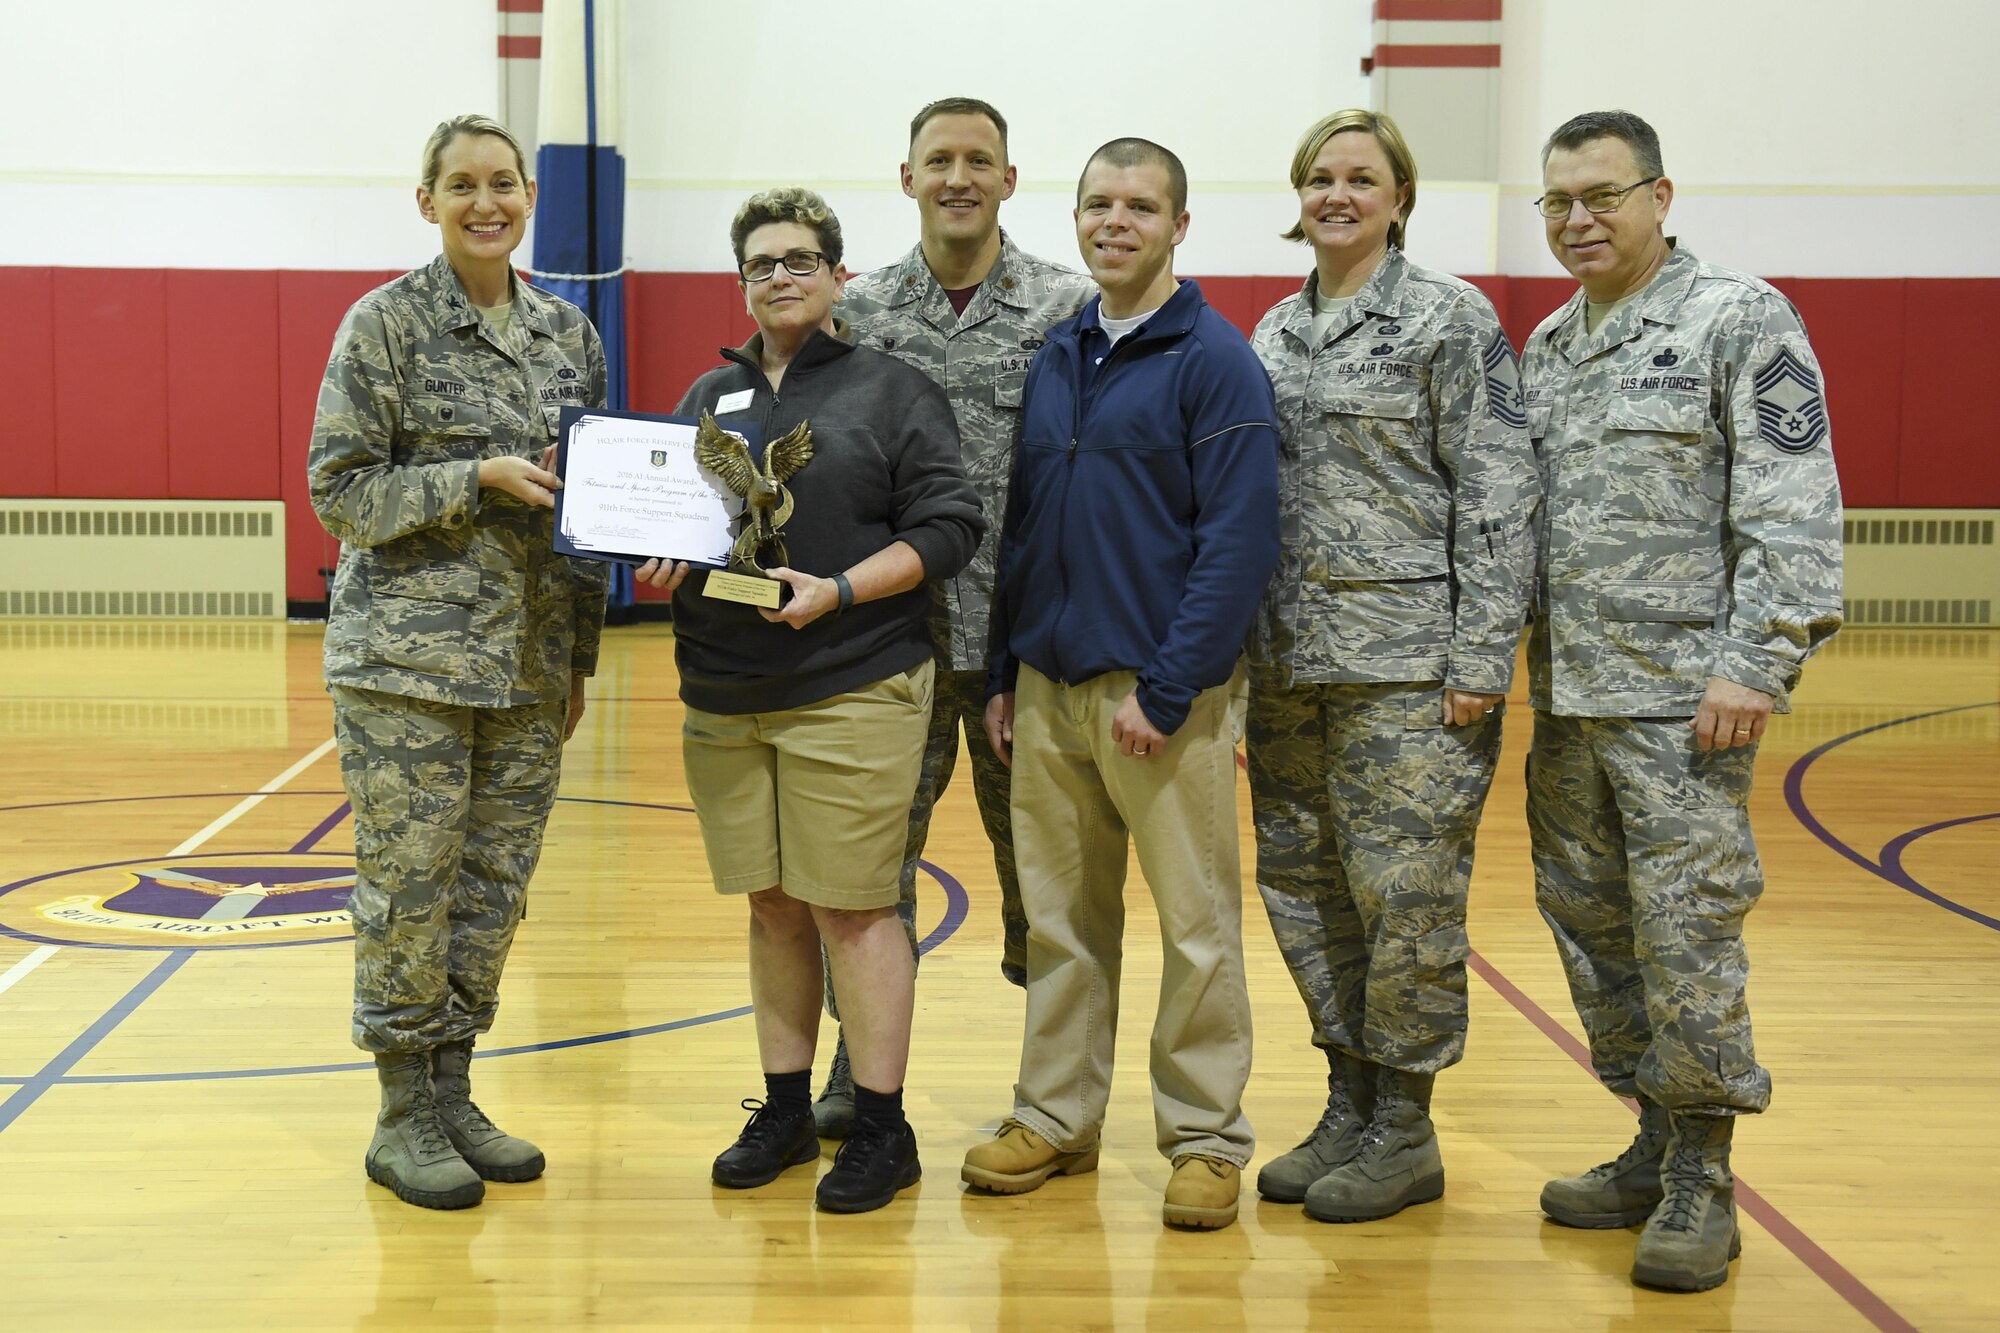 Tamra Davis, director of the 911th Airlift Wing Fitness Center, accepts an award from Col. Anne Gunter, director of manpower, personnel and services, at Headquarters Air Force Reserve Command, recognizing the 911th AW fitness program as the 2016 A1 Fitness and Sports Program of the Year at the 911th AW Fitness Center, November 5, 2017. They were joined by Maj. Brett Dorey, commander of the 911th Airlift Wing Force Support Squadron, Chief Master Sgt. Kelly Kruger, Air Force Reserve Command A1 Superintendent/ 3F000 Major Command Functional Manager, and Chief Master Sgt. Dan Kelly, Air Force Reserve Command 3F100 Major Command Functional Manager.